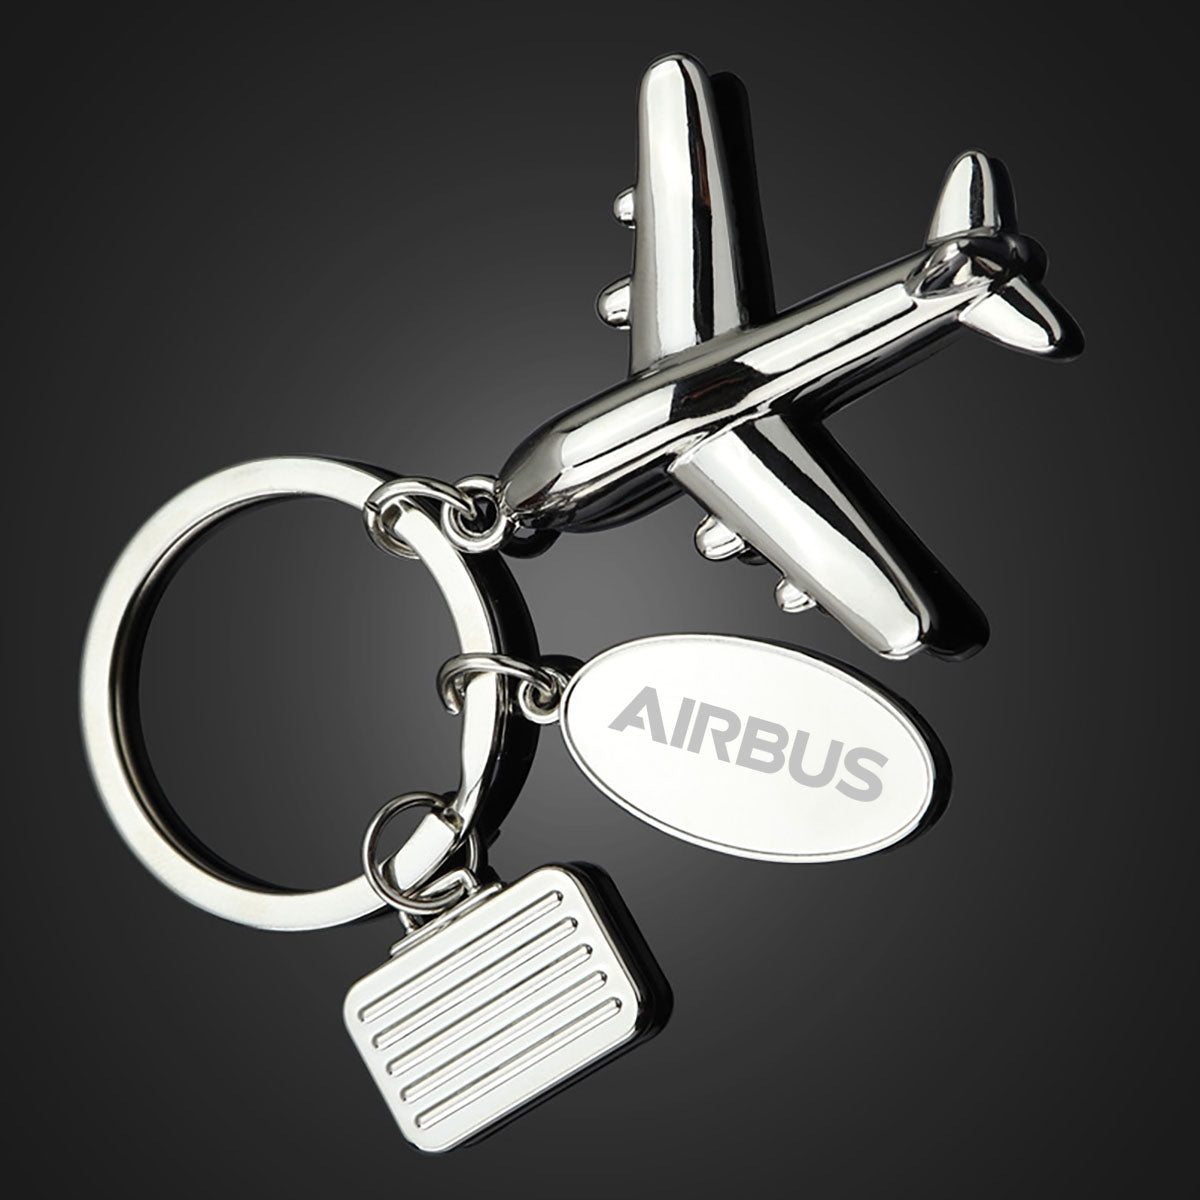 Airbus & Text Designed Suitcase Airplane Key Chains